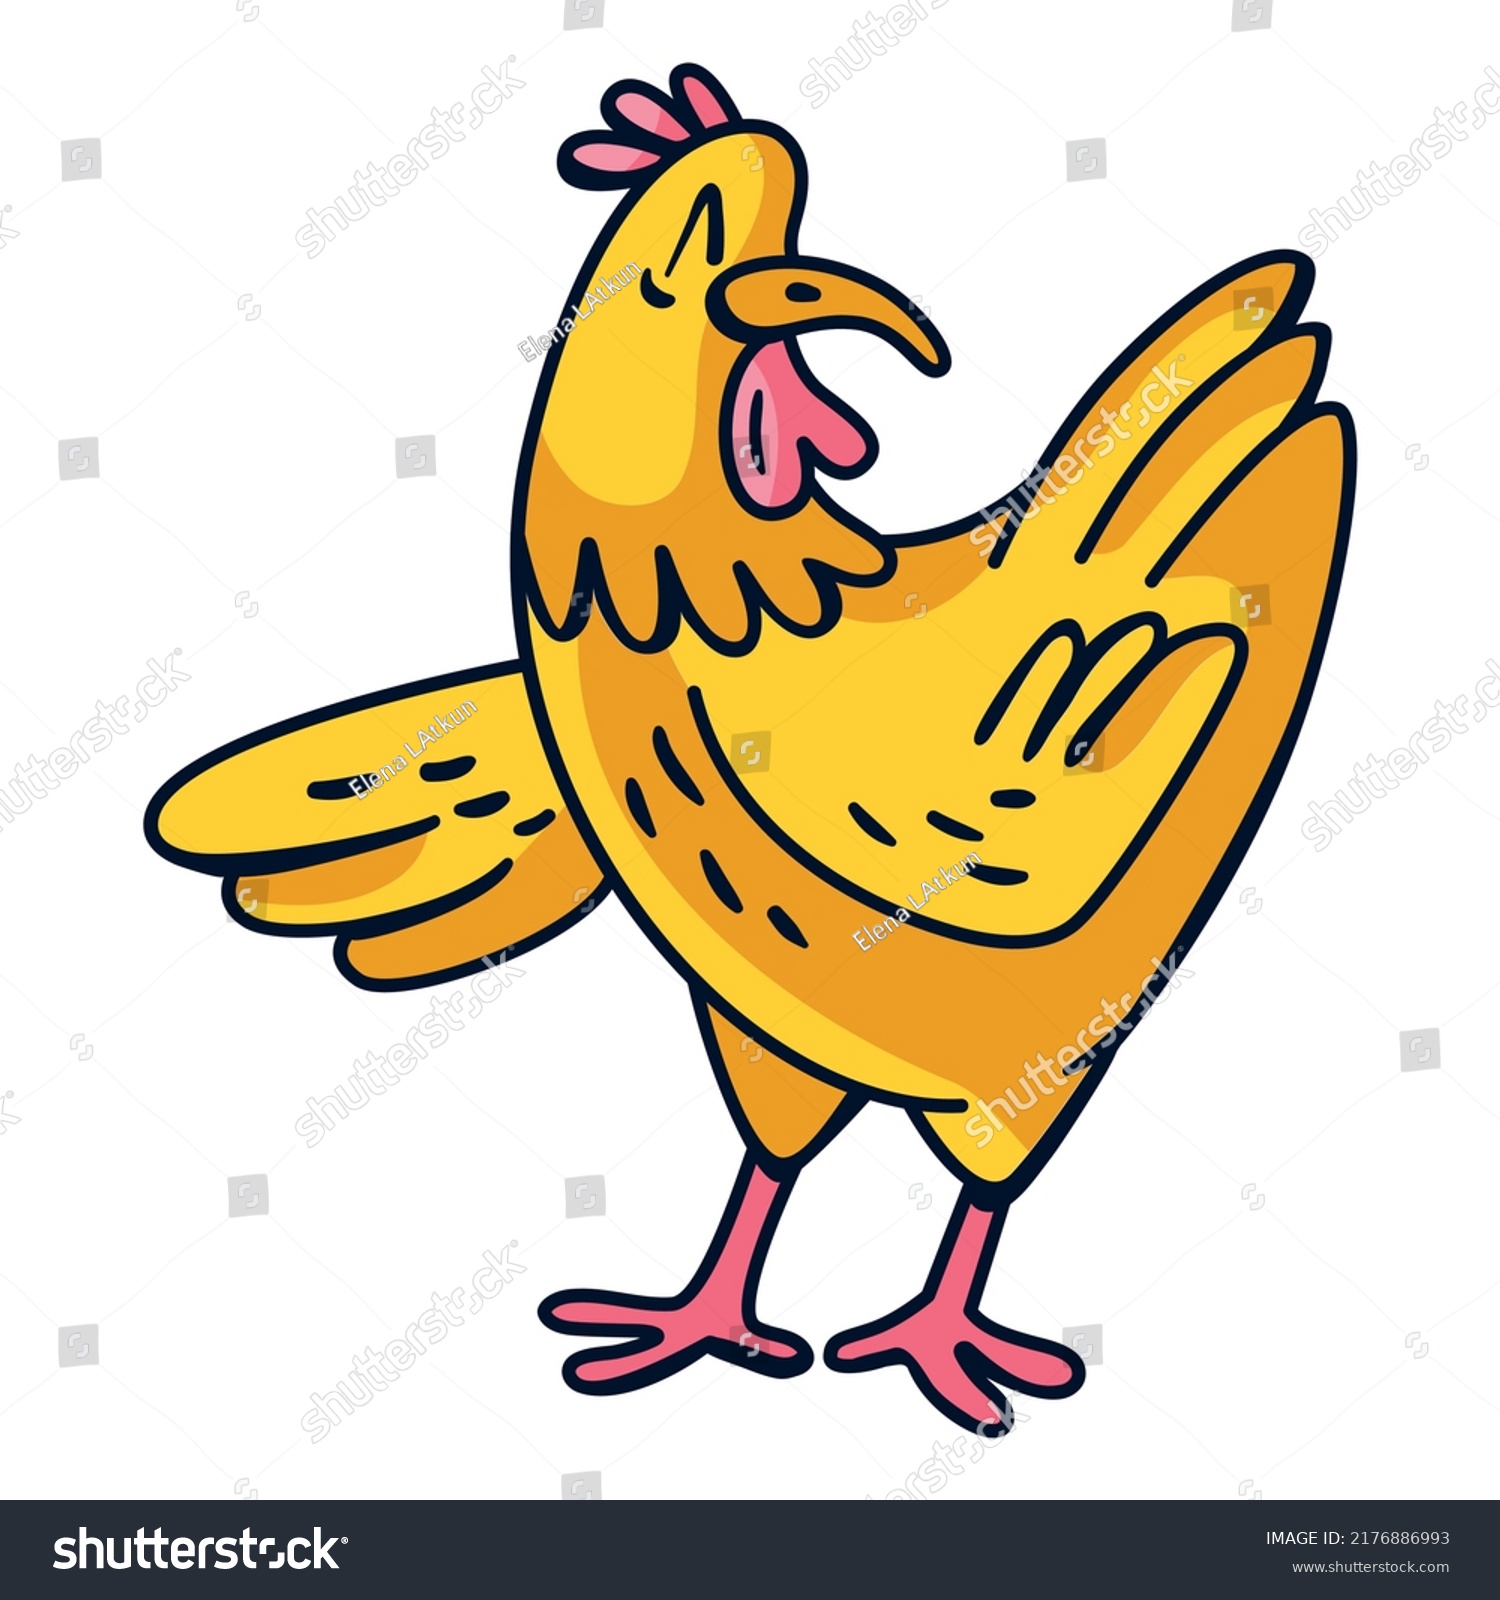 Chickens Cartoon High Quality Vector Stock Vector Royalty Free 2176886993 Shutterstock 